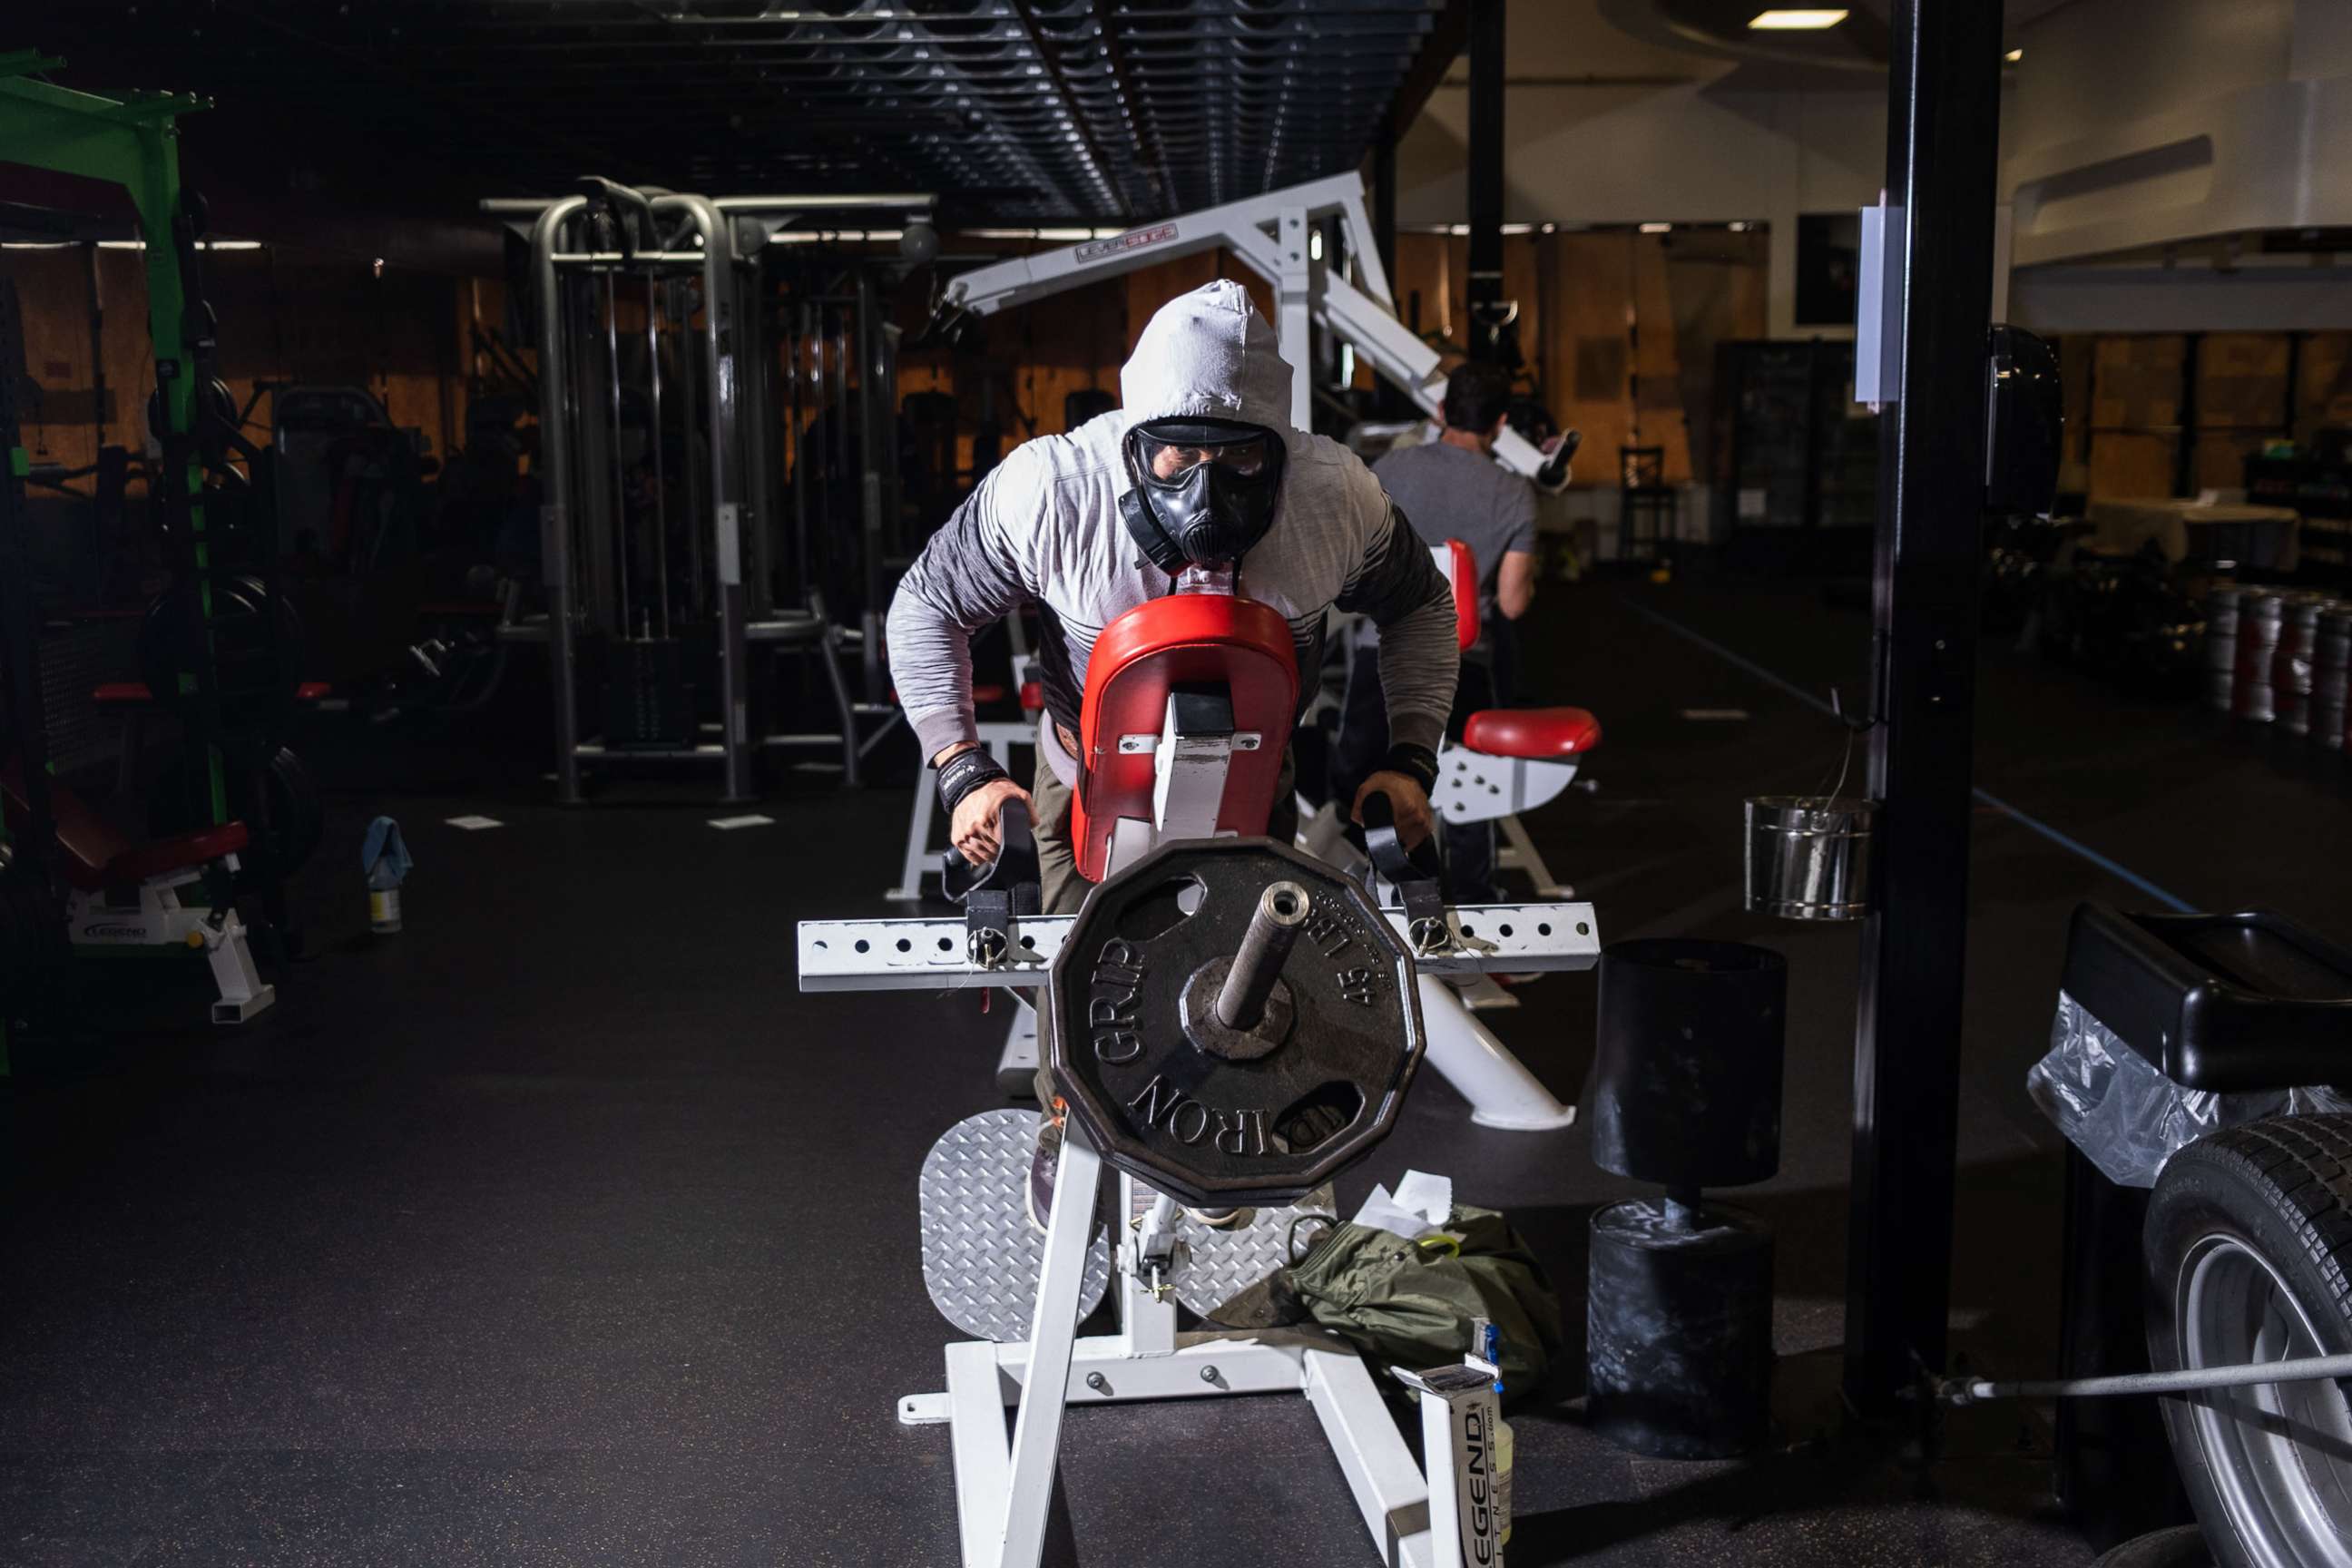 PHOTO: A man wears a mask while working out out at a gym in Bellmawr, N.J., May 22, 2020.